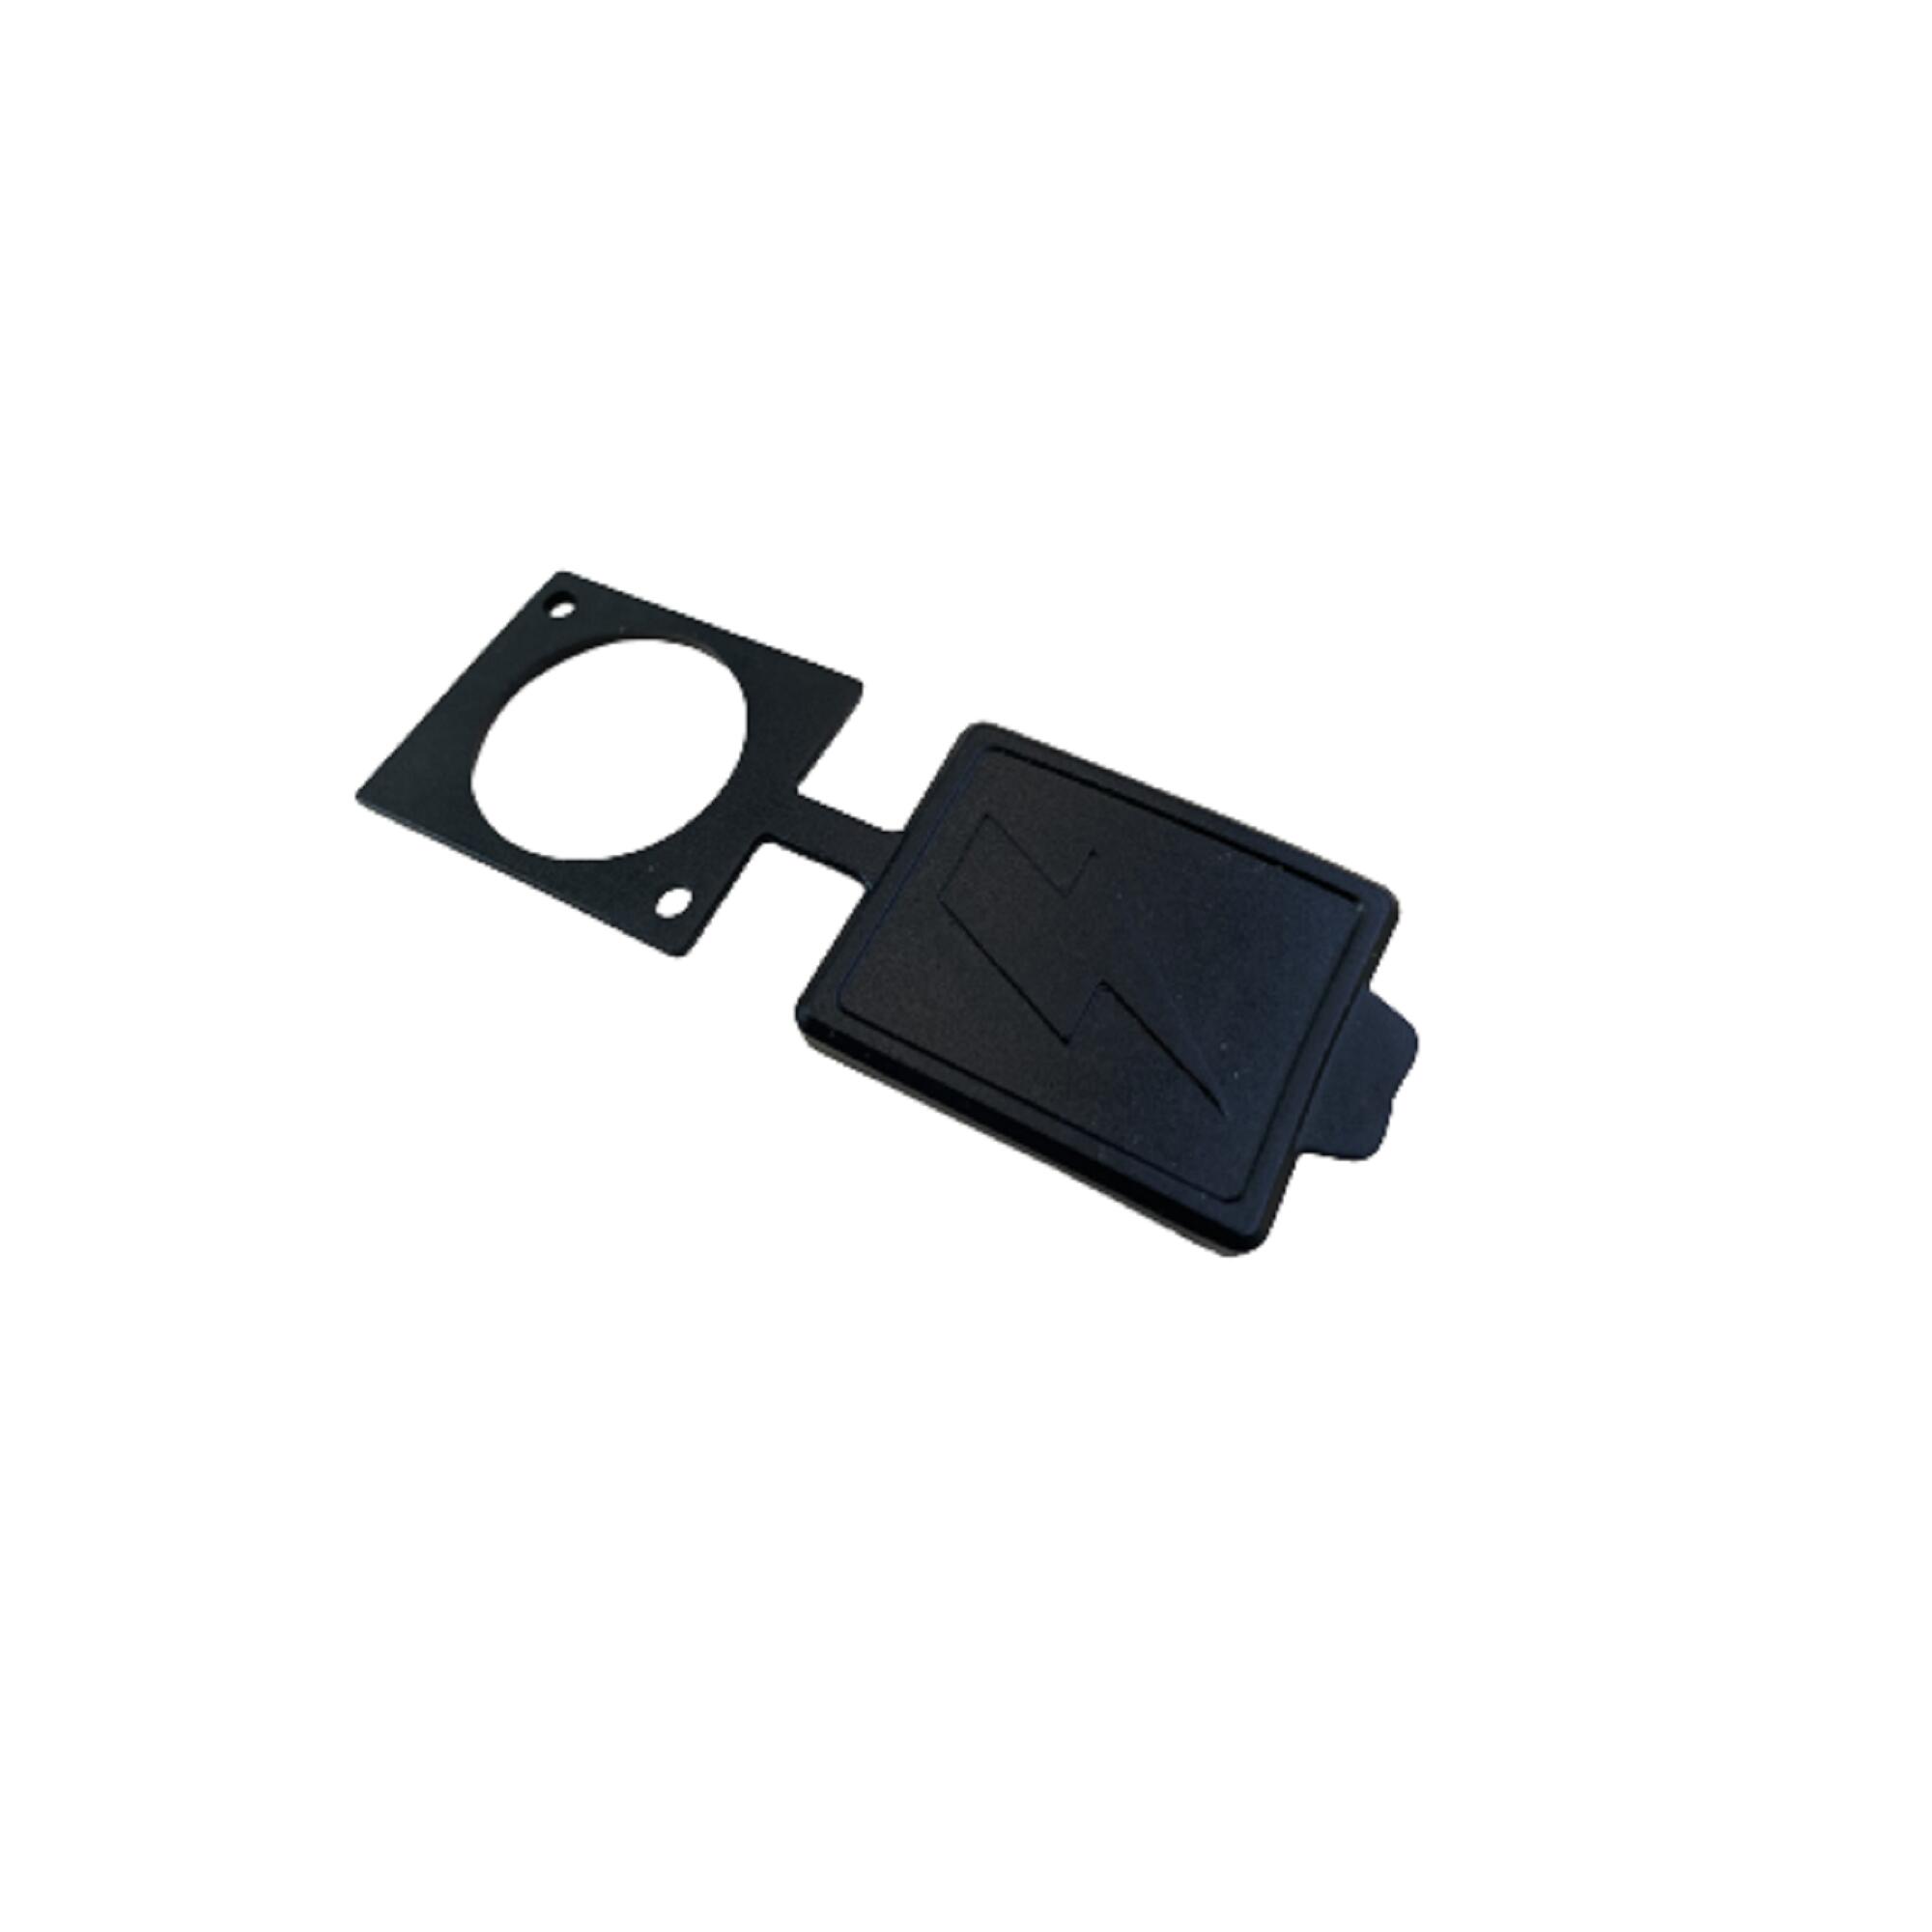 ROCKRIDER Protective Connector Cover for the DK-11 External Battery